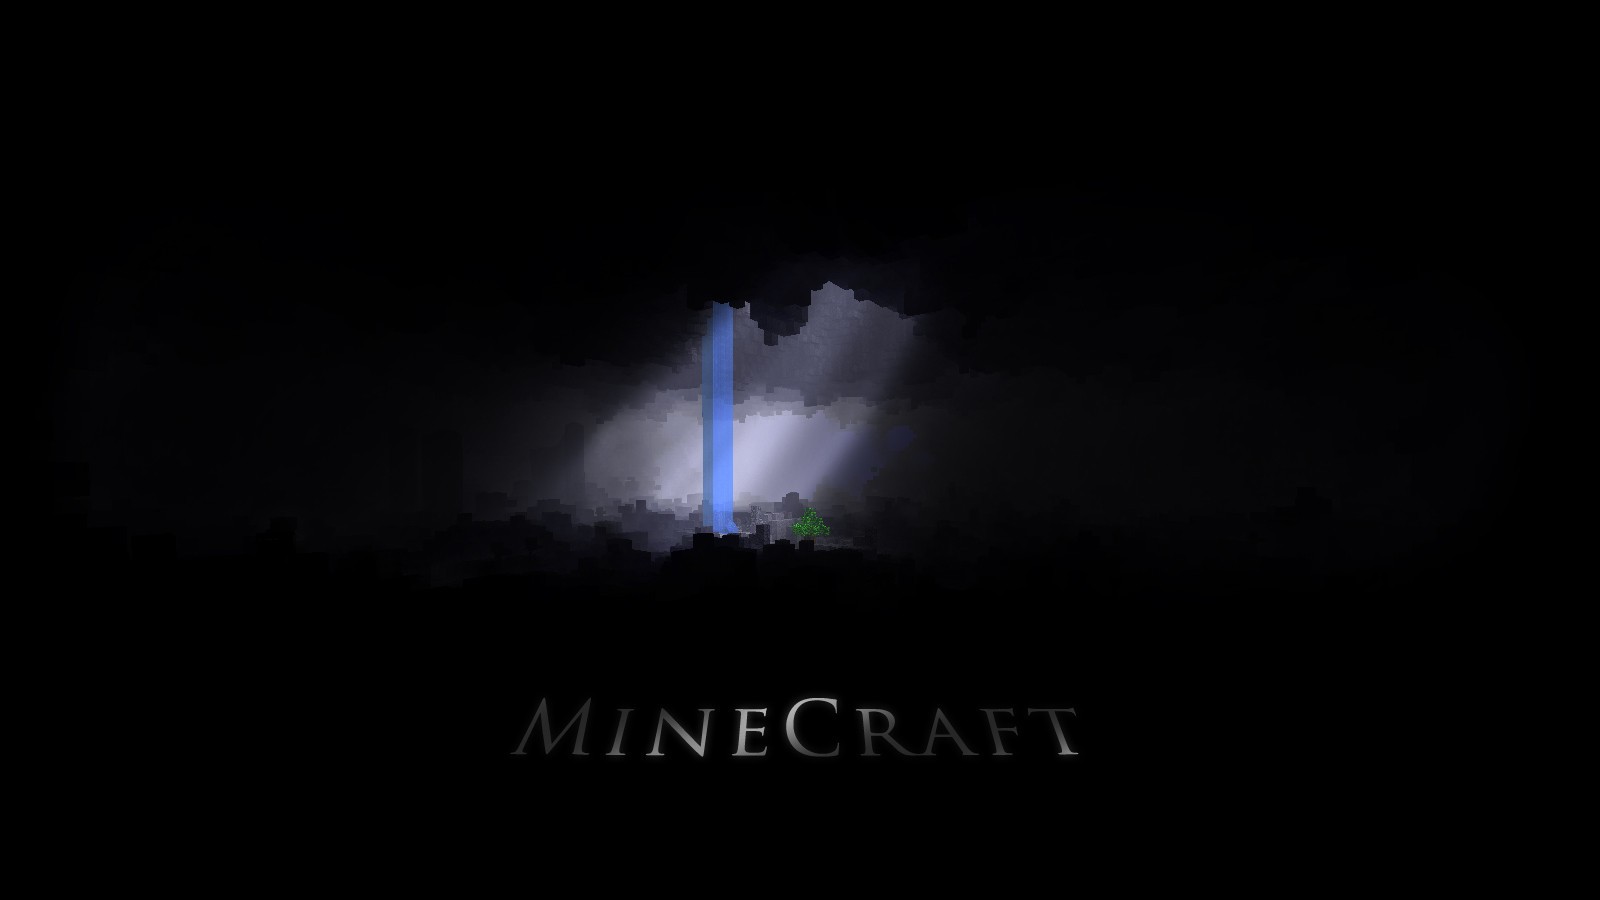 General 1600x900 Minecraft video games PC gaming minimalism simple background black background video game art